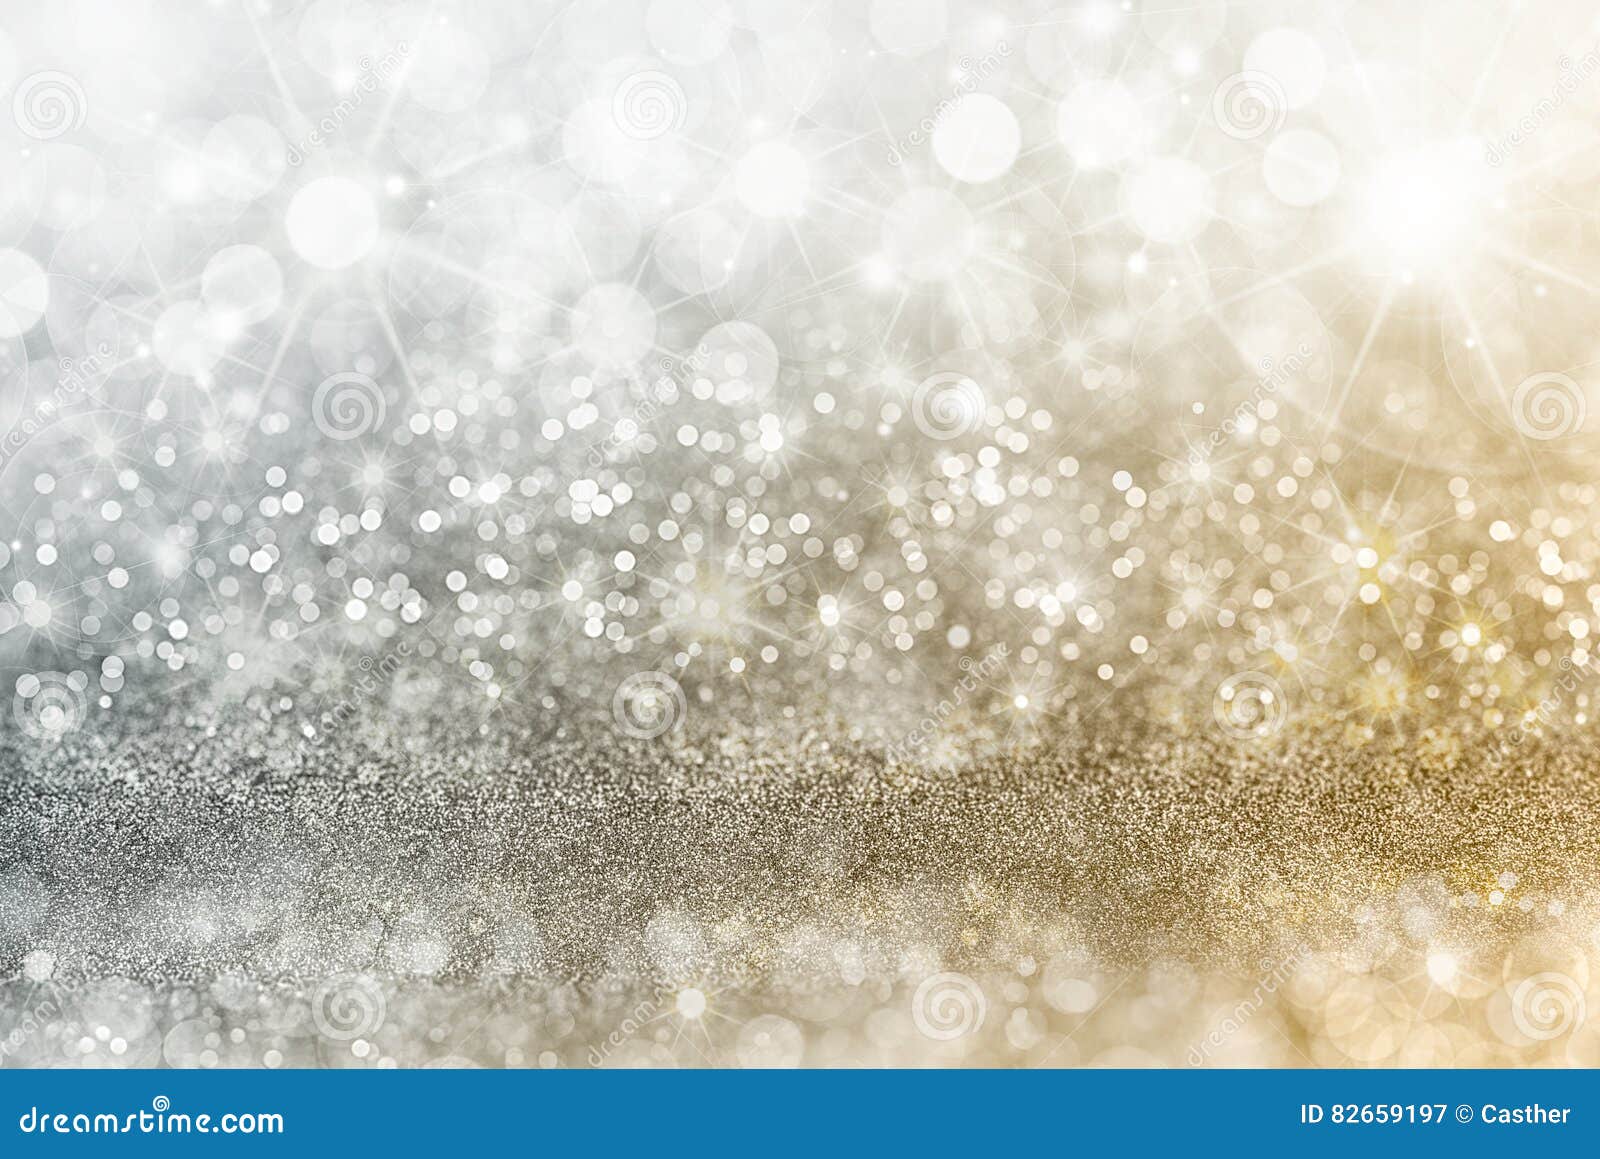 Silver and Gold Christmas Background Stock Image - Image of background,  glitter: 82659197